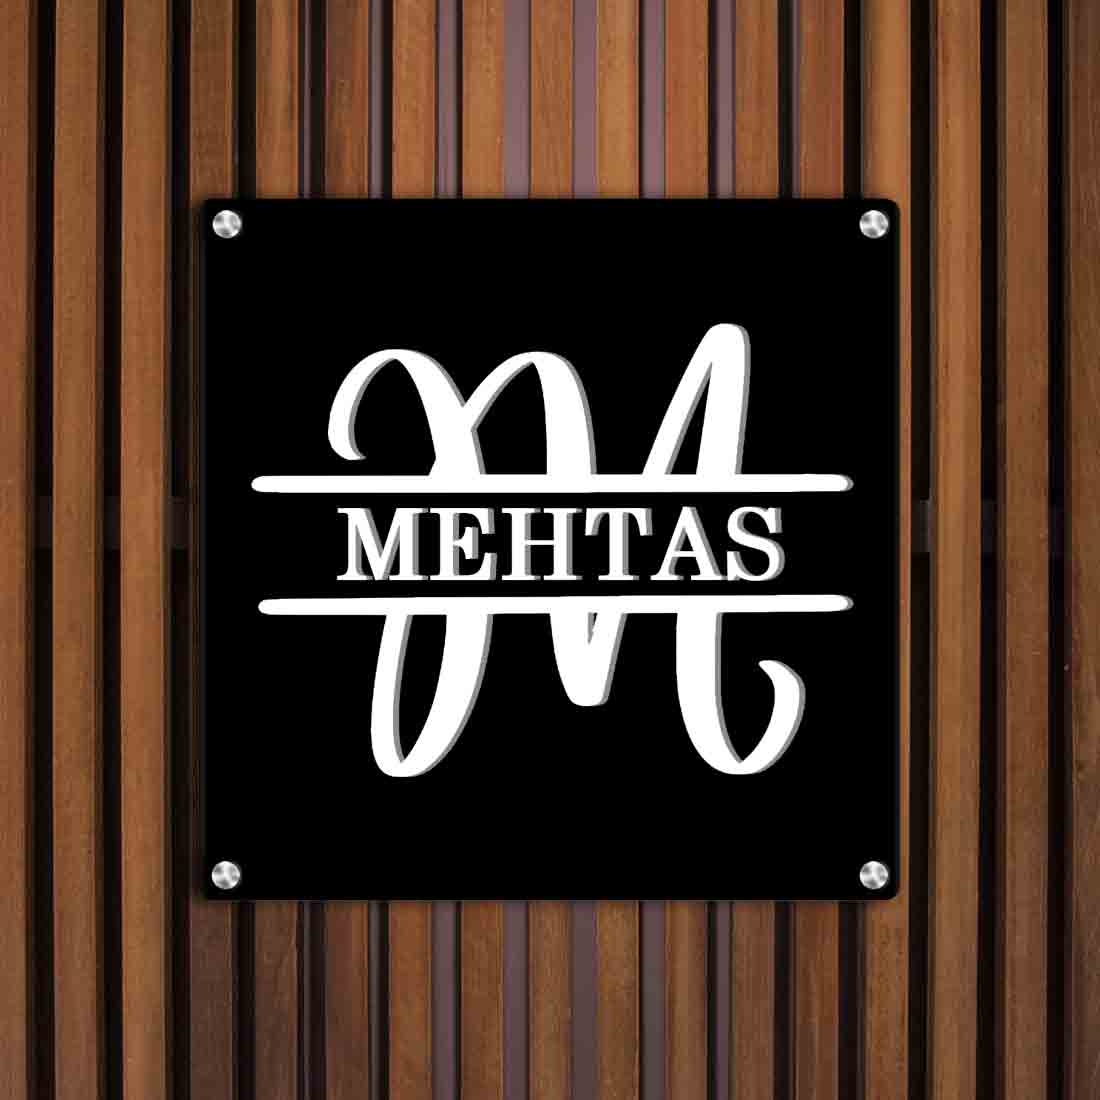 Personalised Metal Square Name Plate for House Entrance With Monogram